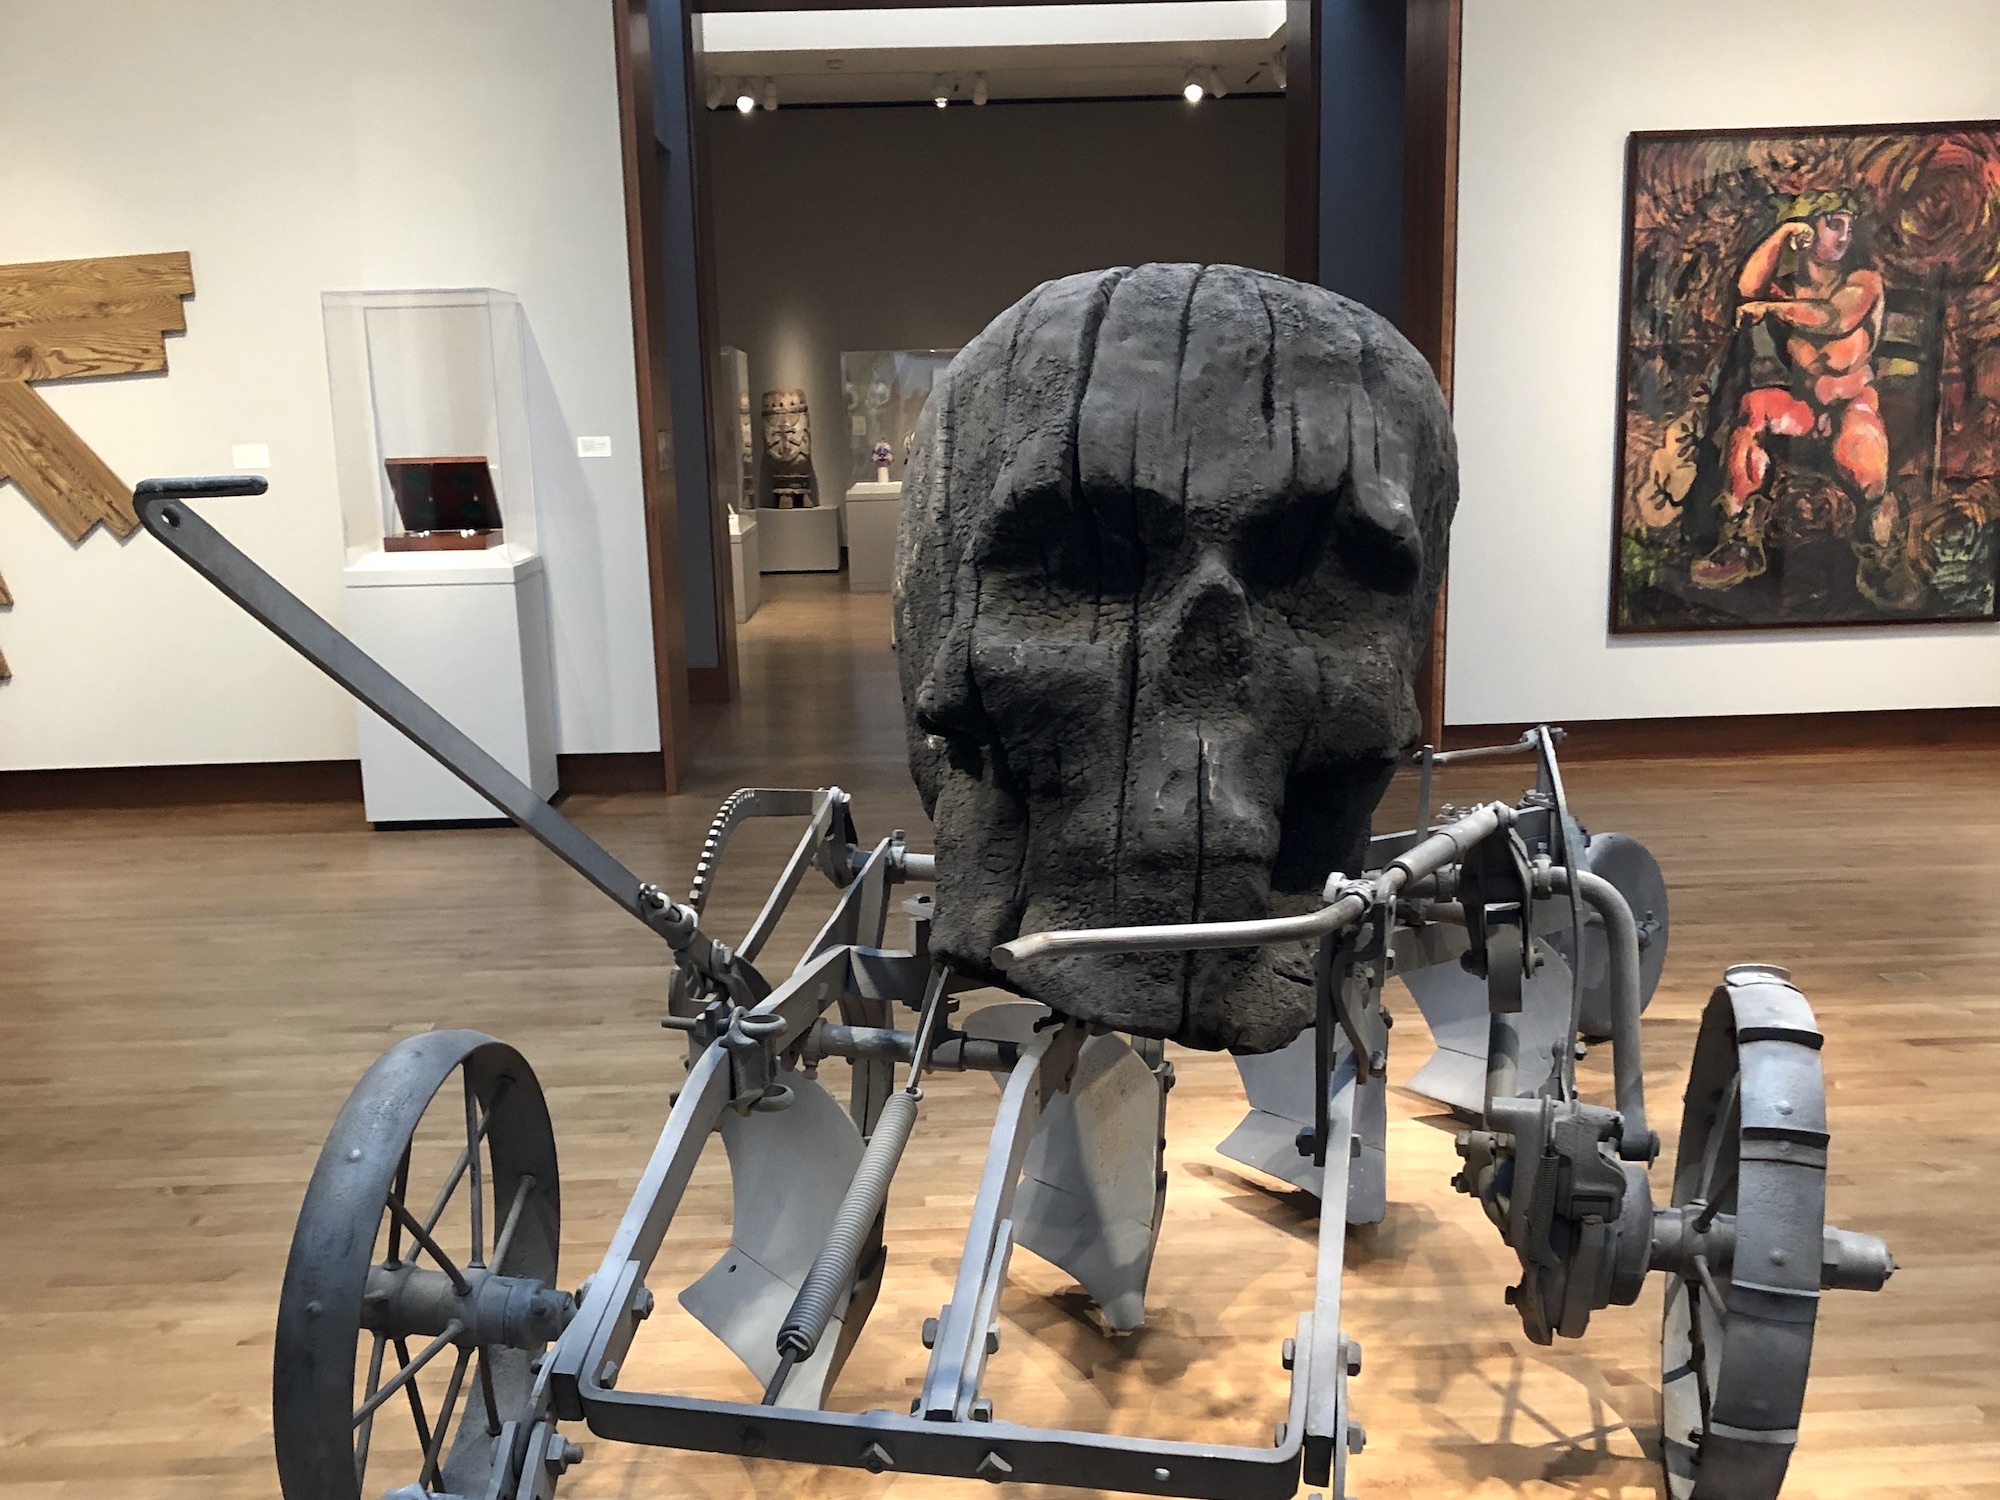 The Plow by Jim Dine at the Chazen Museum of Art in Madison Wisconsin.